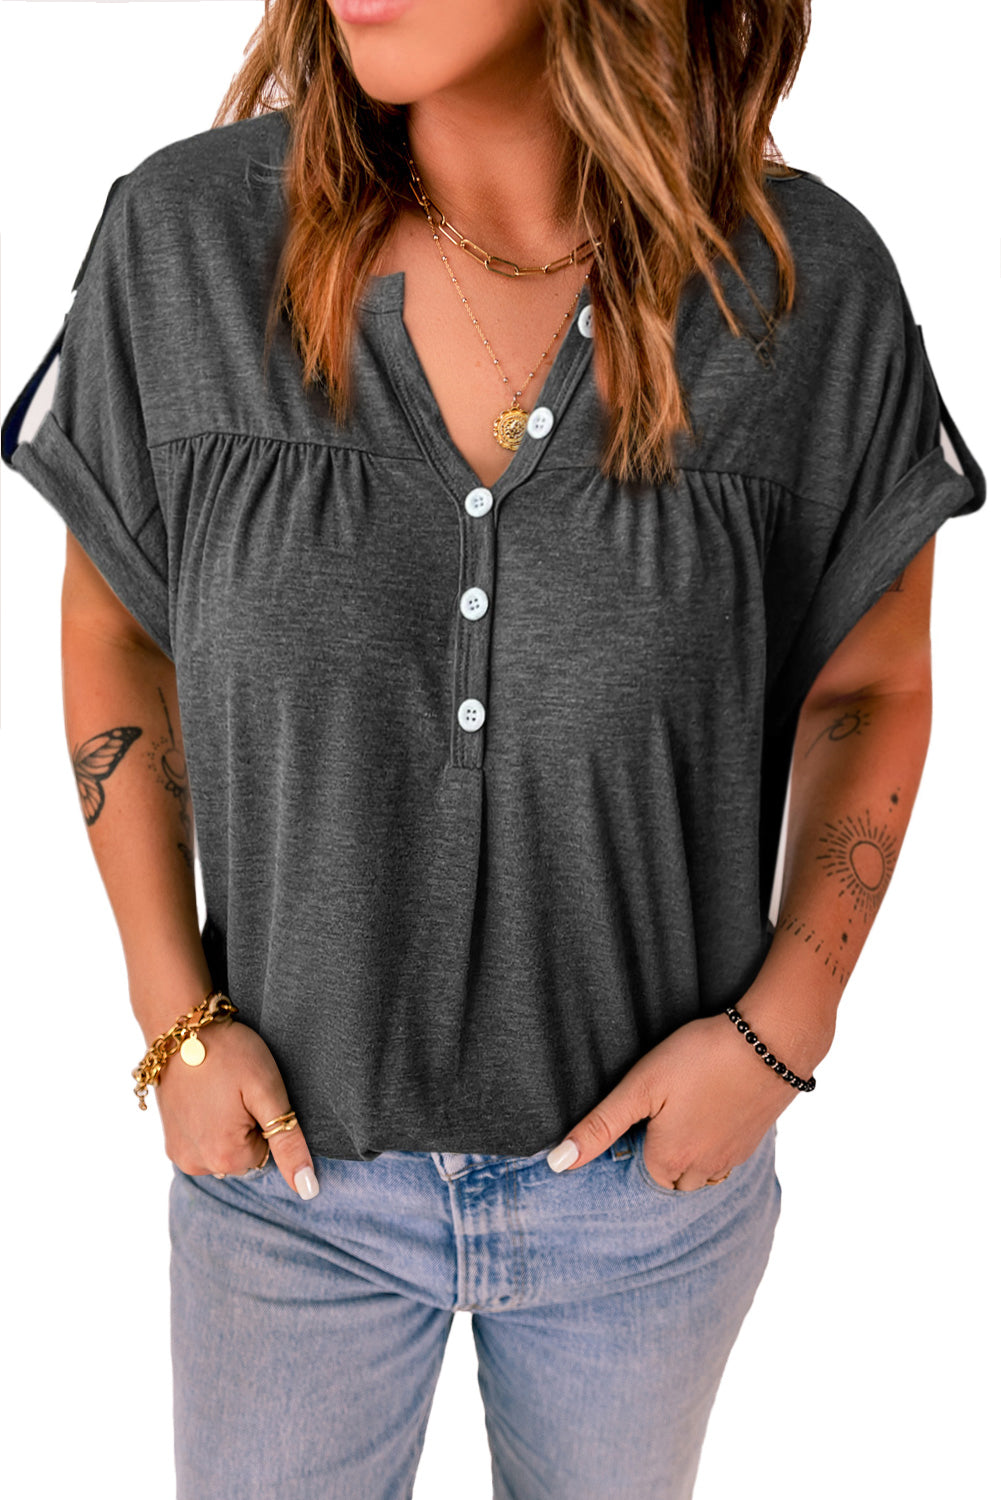 Gray Solid Button V Neck Short Sleeve Top - Cowtown Bling N Things